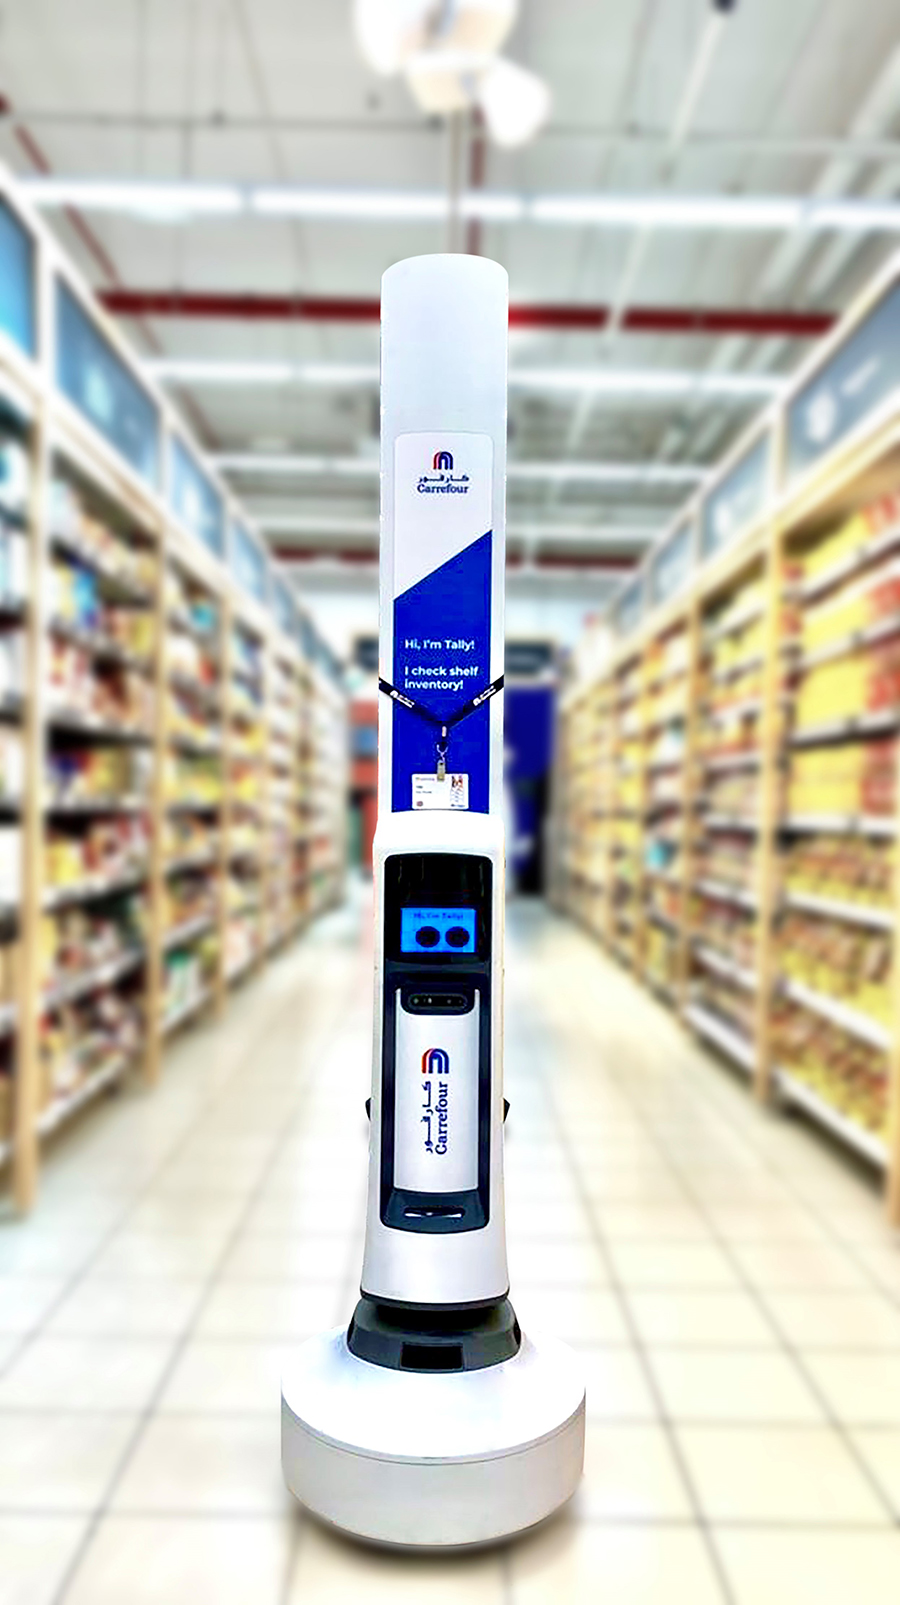 Image for Carrefour Employs More Tally Robots Across Its Stores